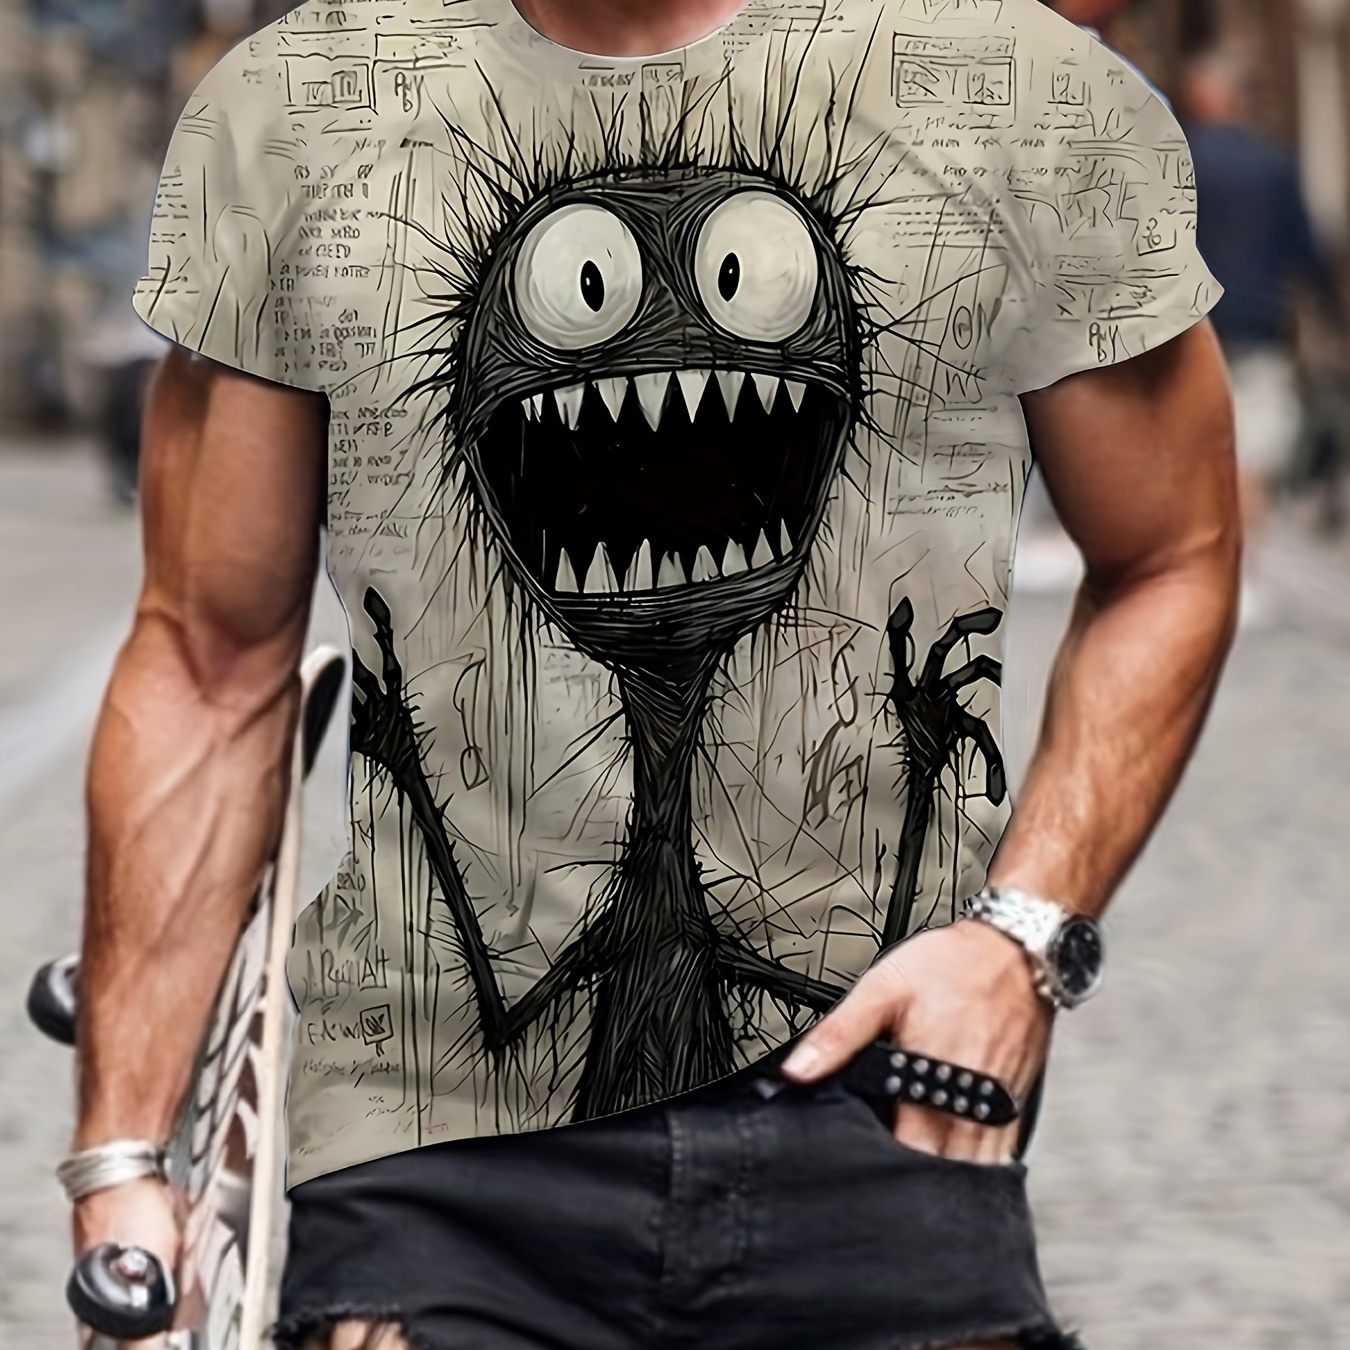 

Screaming Monster Pattern Crew Neck And Short Sleeve T-shirt, Chic And Stylish Tops For Men's Summer Outdoors Wear